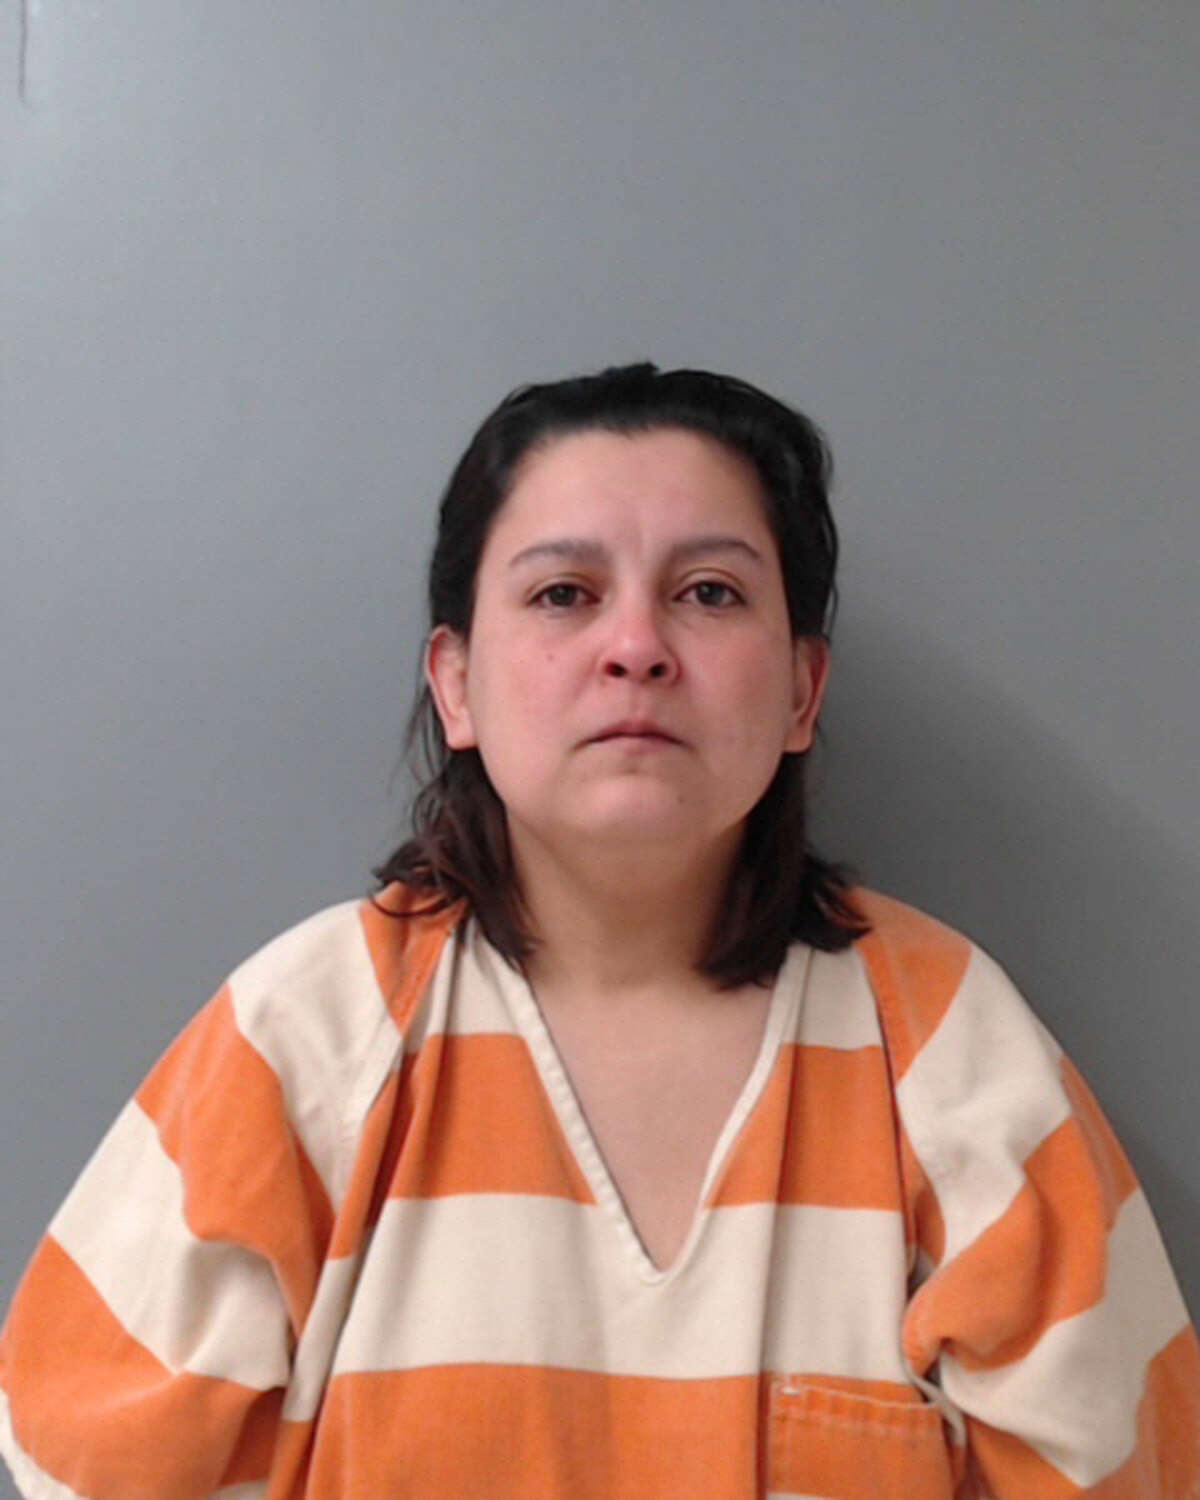 Monica Dominguez, 37, was charged with abuse of a human corpse, a state jail felony, tampering with or fabricating physical evidence by altering, destroying or concealing a human corpse, a second-degree felony and two counts of endangering a child.